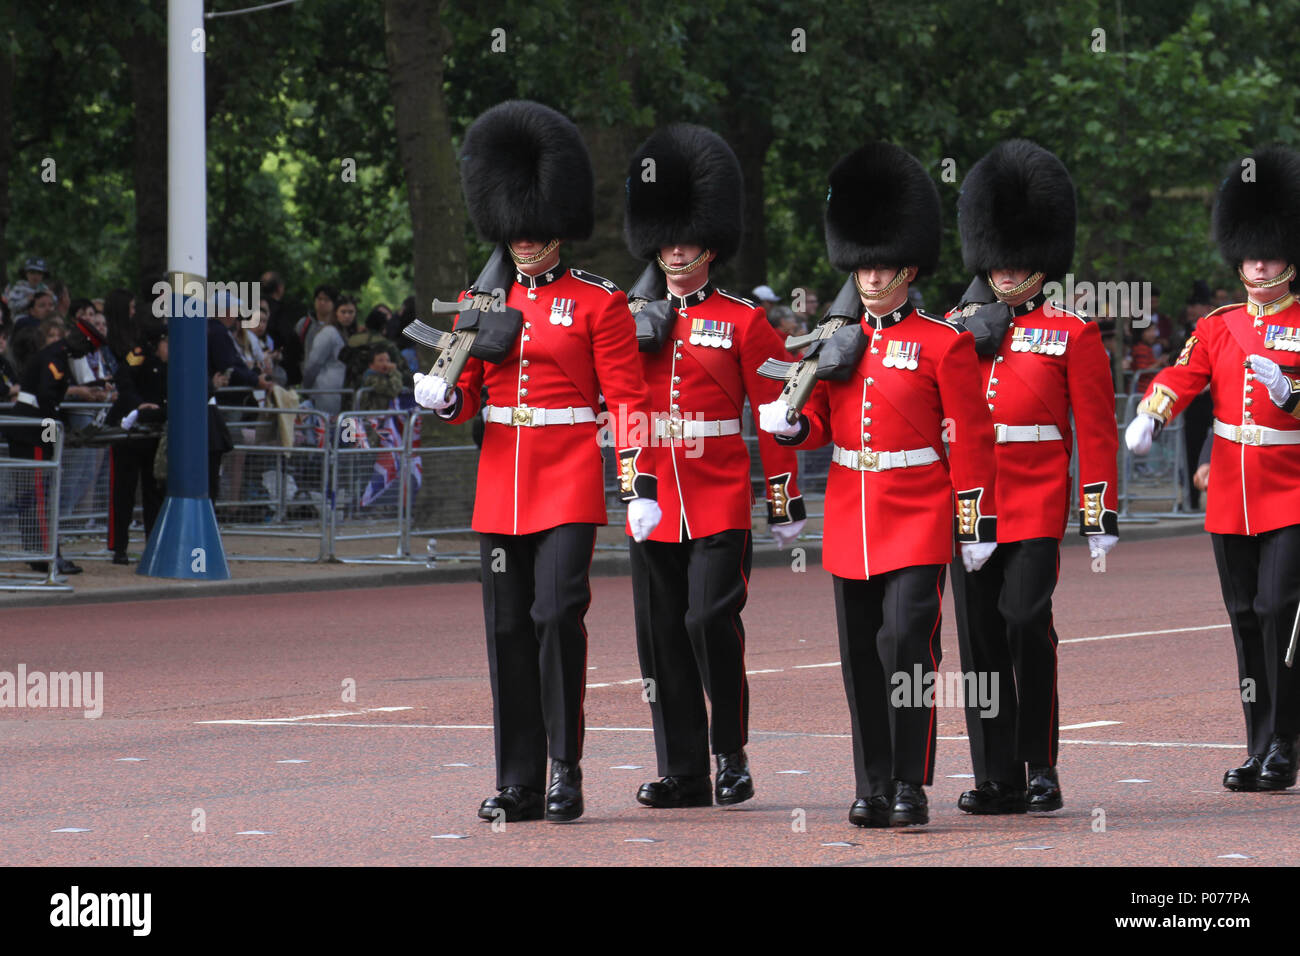 London, UK 9 June 2018: Hundreds of Guardsmen march along the Mall to the Horse Guards Parade Ground as they make their way to the Horse Guards Parade Ground on 9 June 2018. Over 1400 parading soldiers, 200 horses and 400 musicians come together each June in a great display of military precision, horsemanship and fanfare to mark The Queen's official birthday. Credit: David Mbiyu Stock Photo